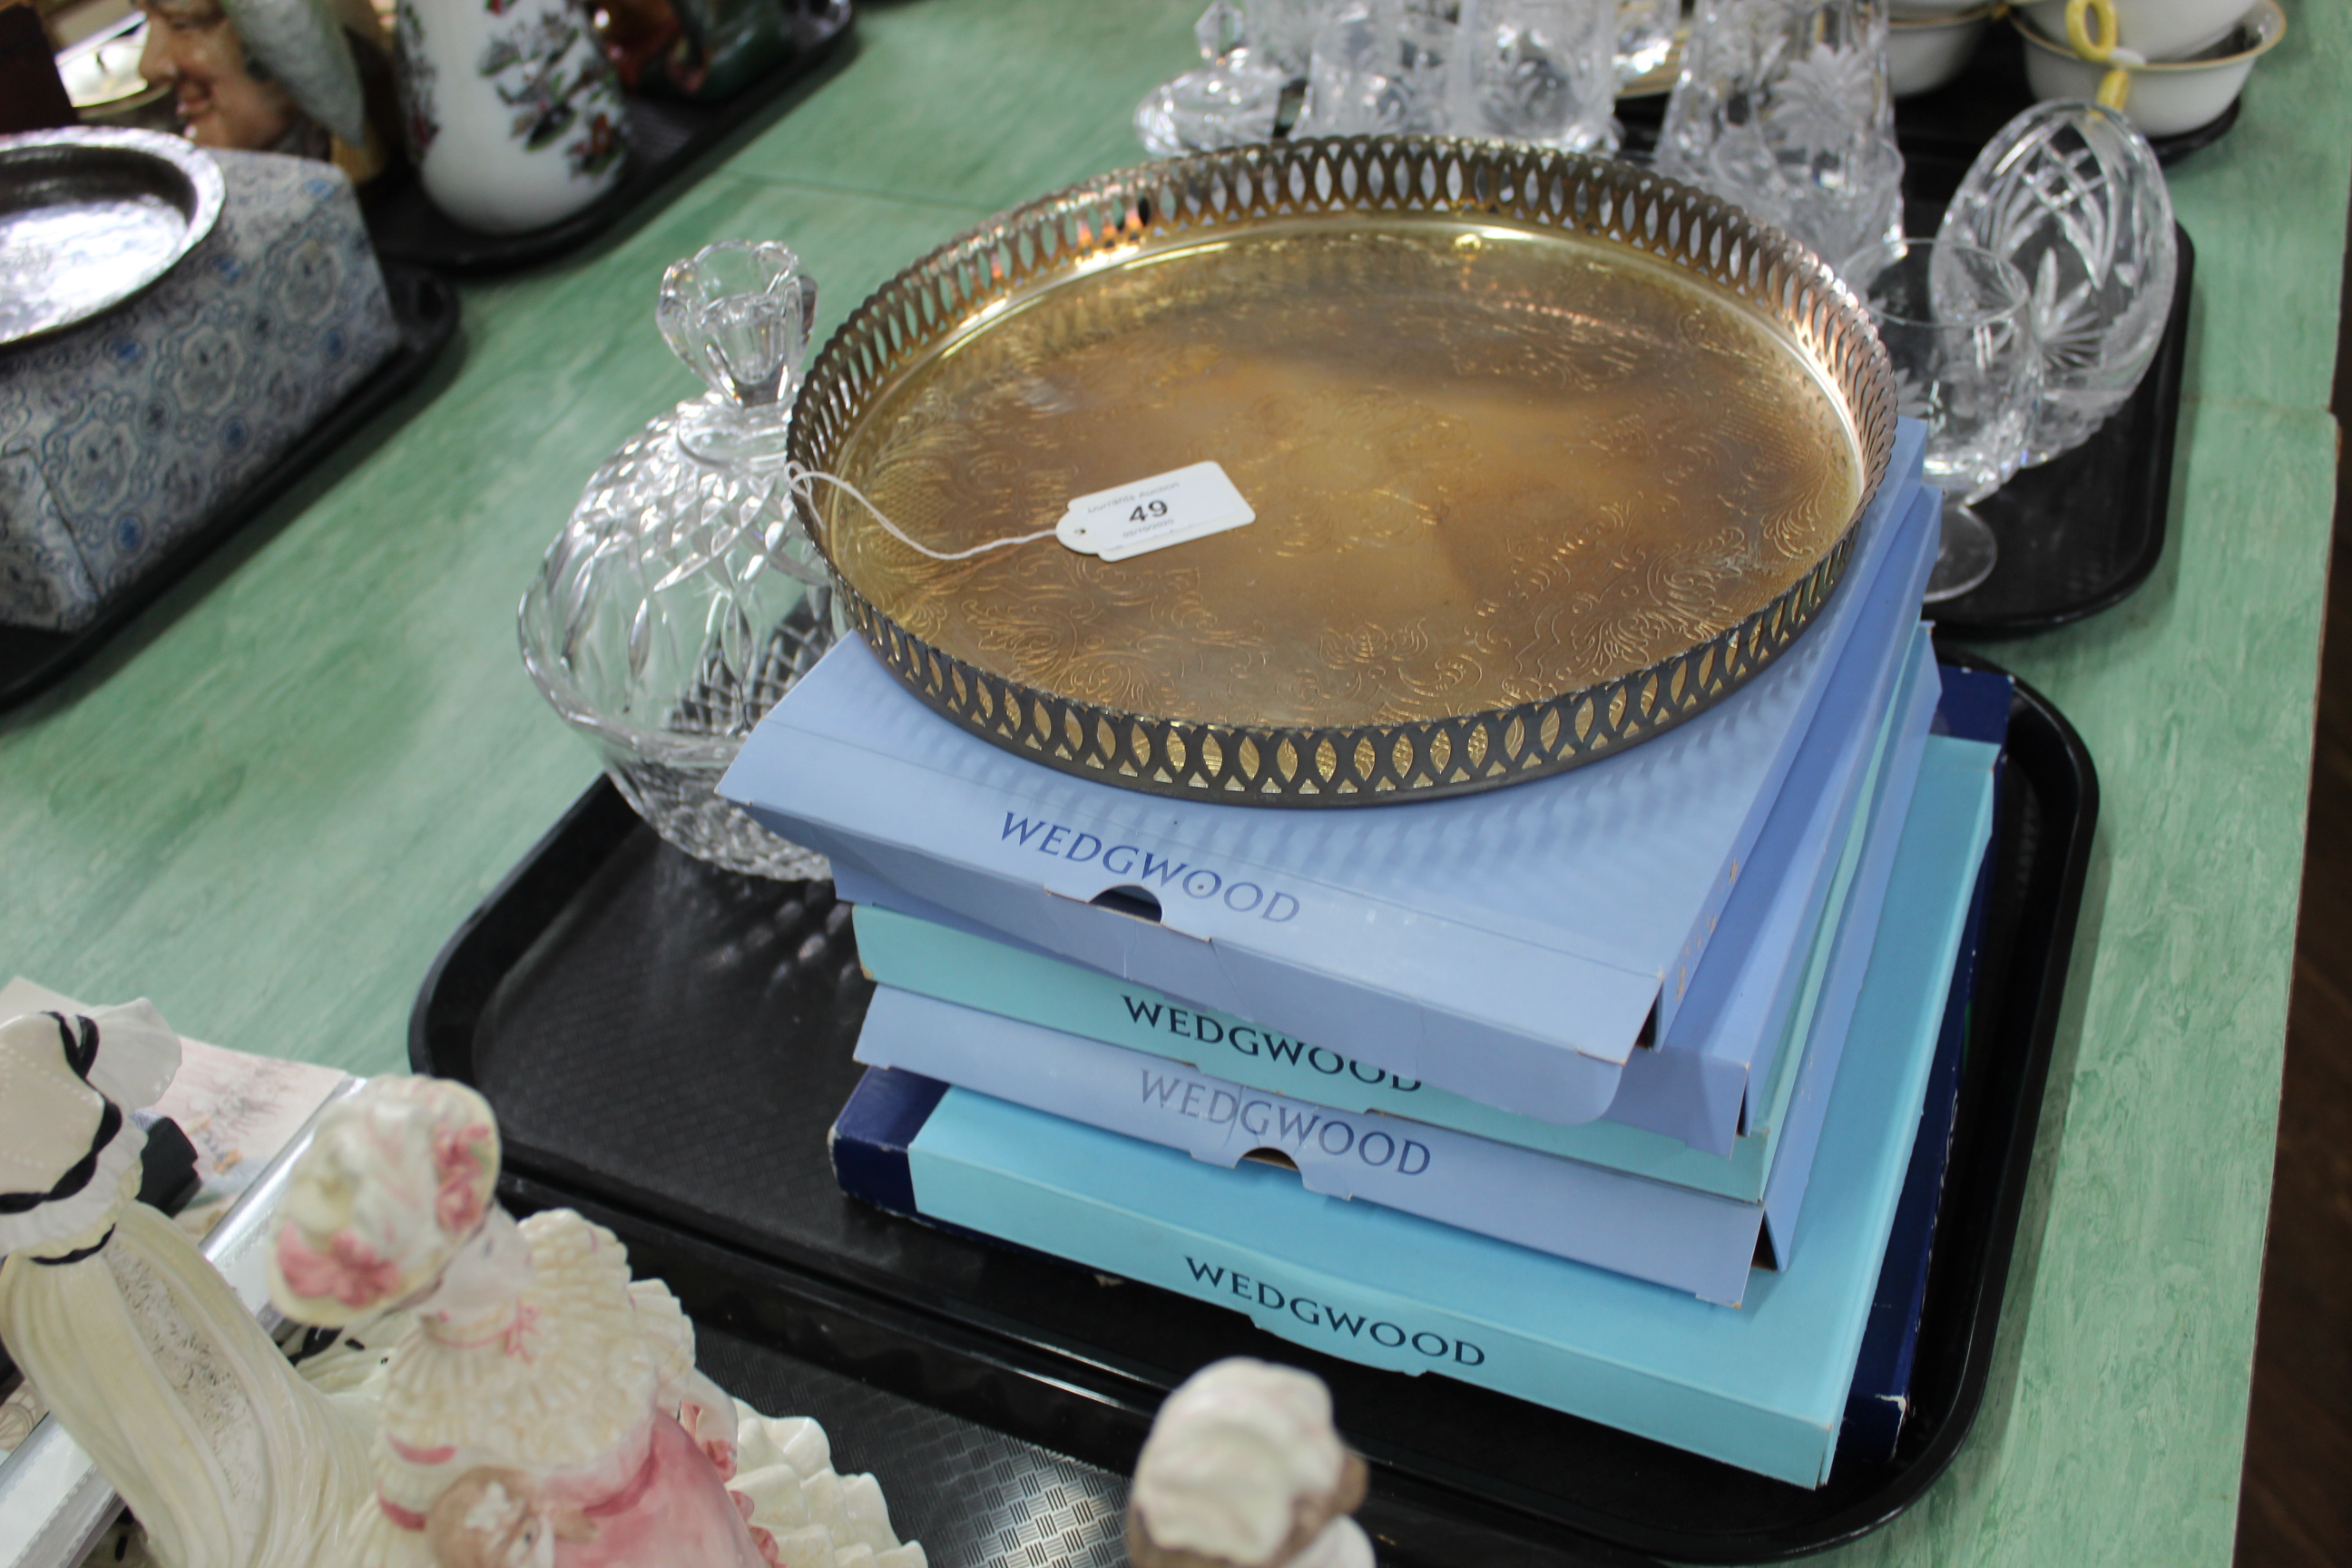 Five Wedgwood Royal commemorative plates plus a plated tray and a glass bowl with lid - Image 2 of 2